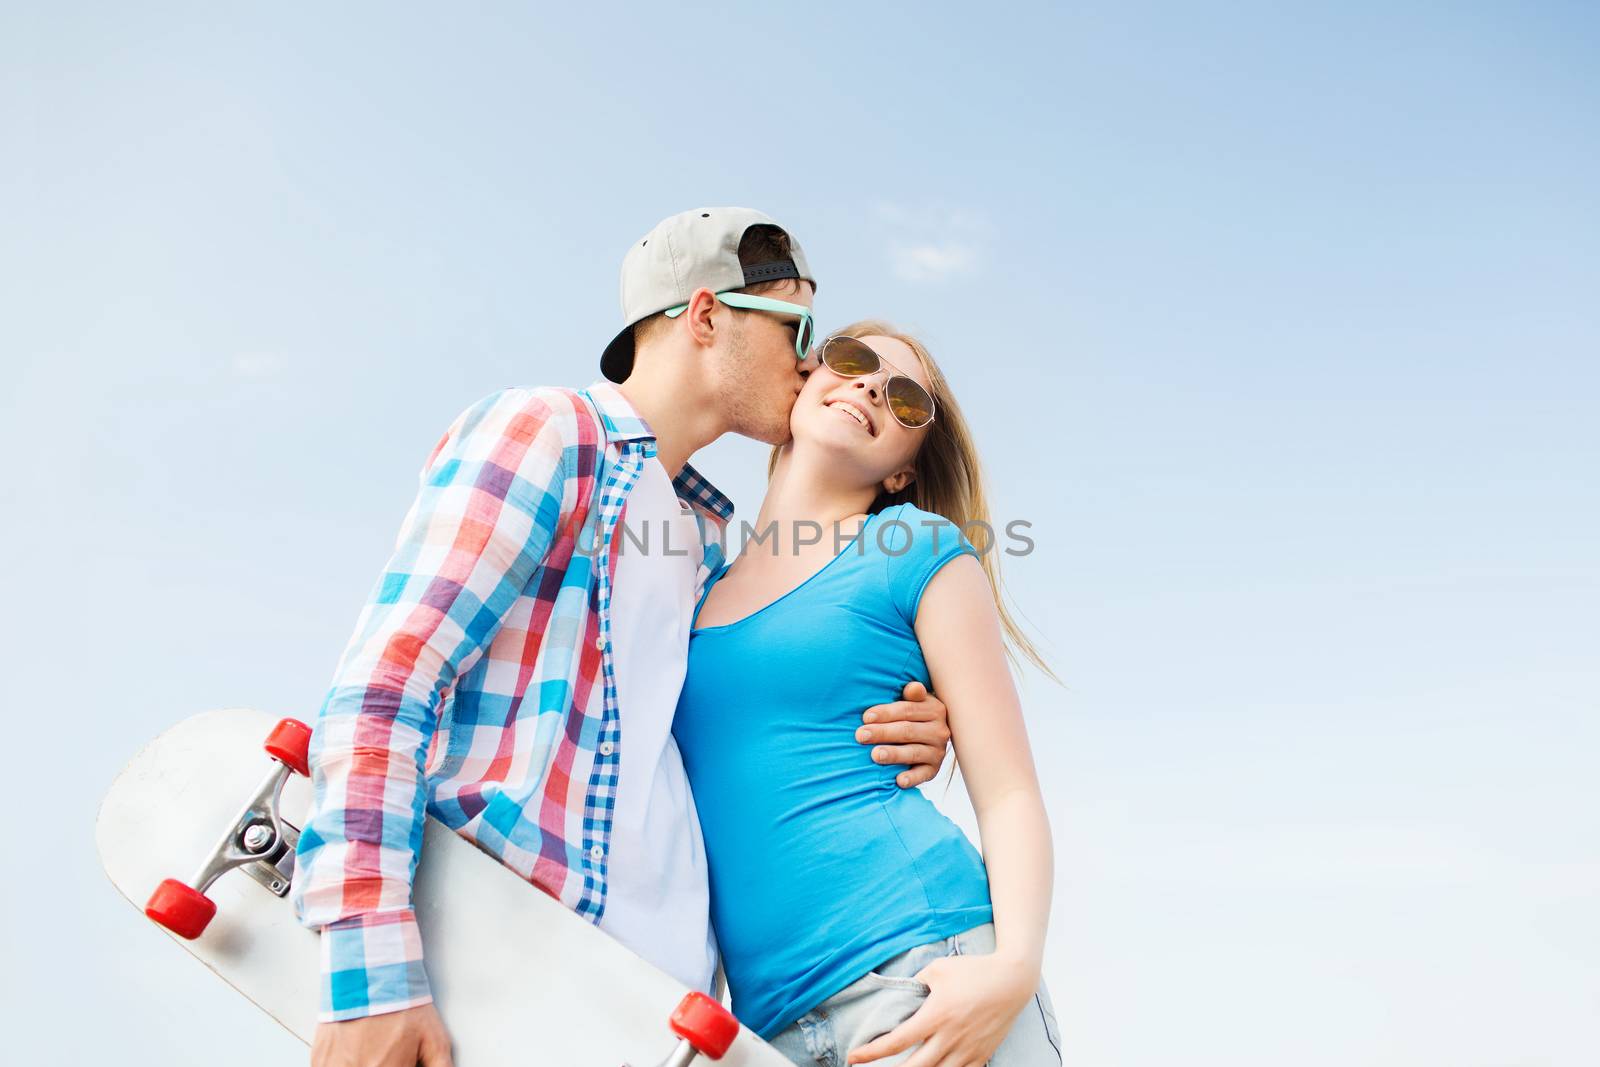 holidays, vacation, love and friendship concept - smiling couple with skateboard kissing outdoors